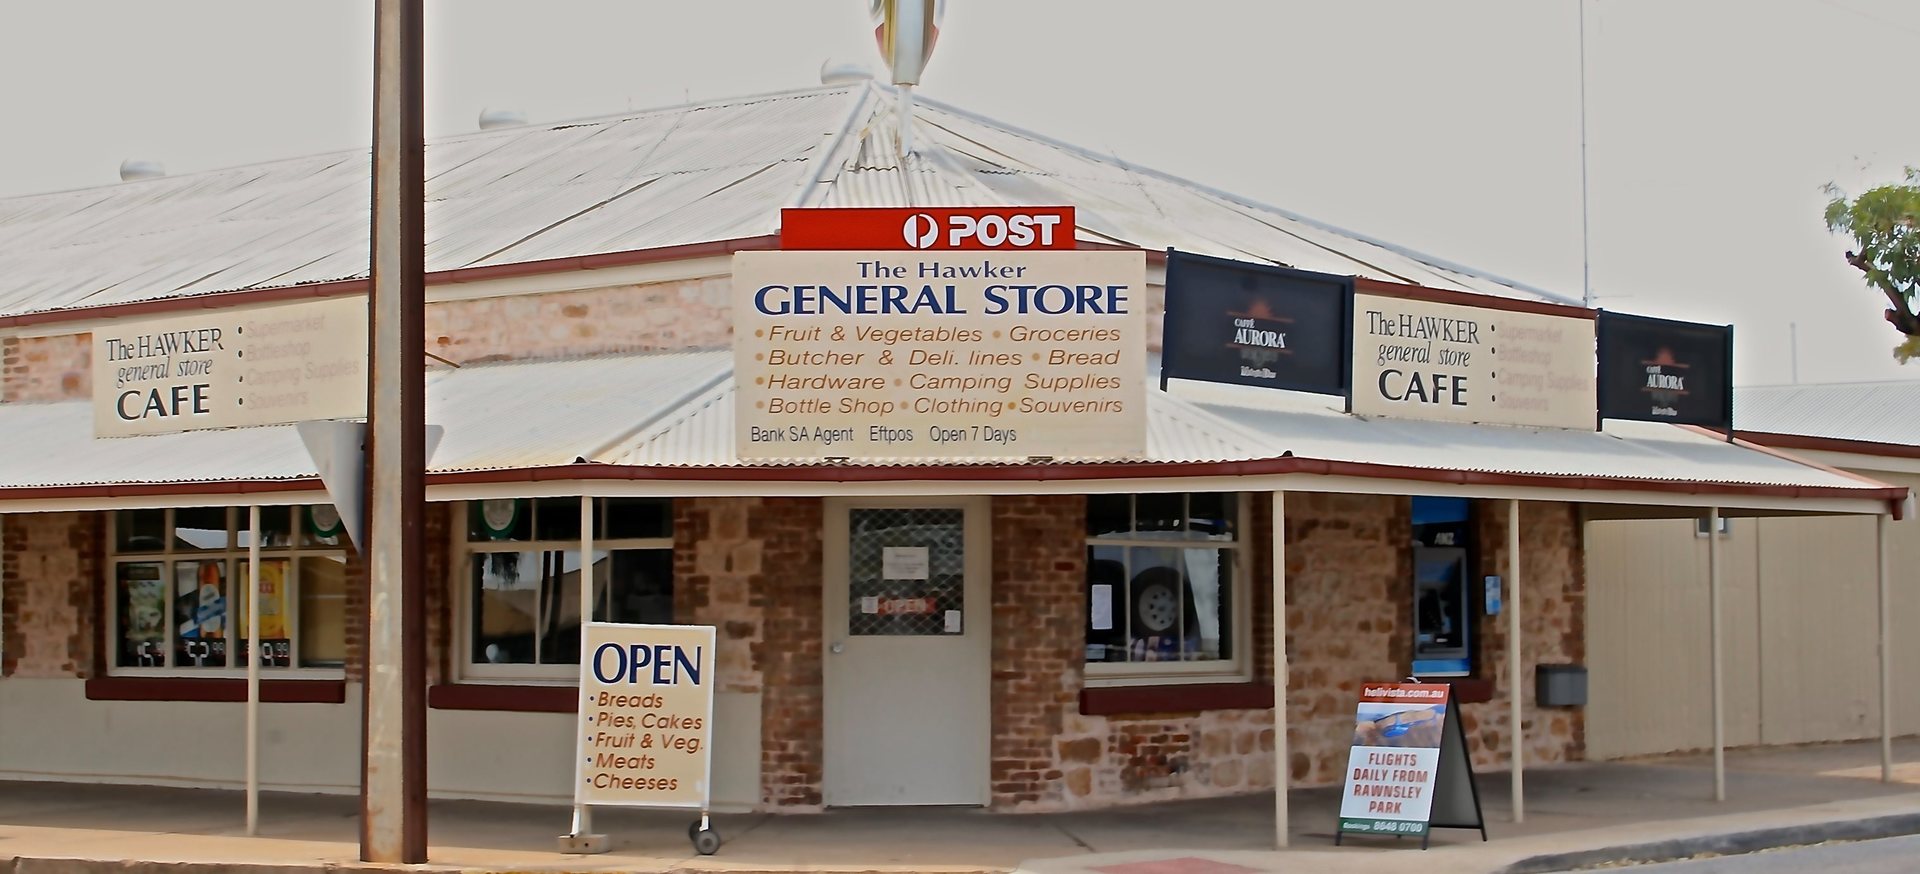 Post Office General Store  Hawker, SA  -...Business For Sale